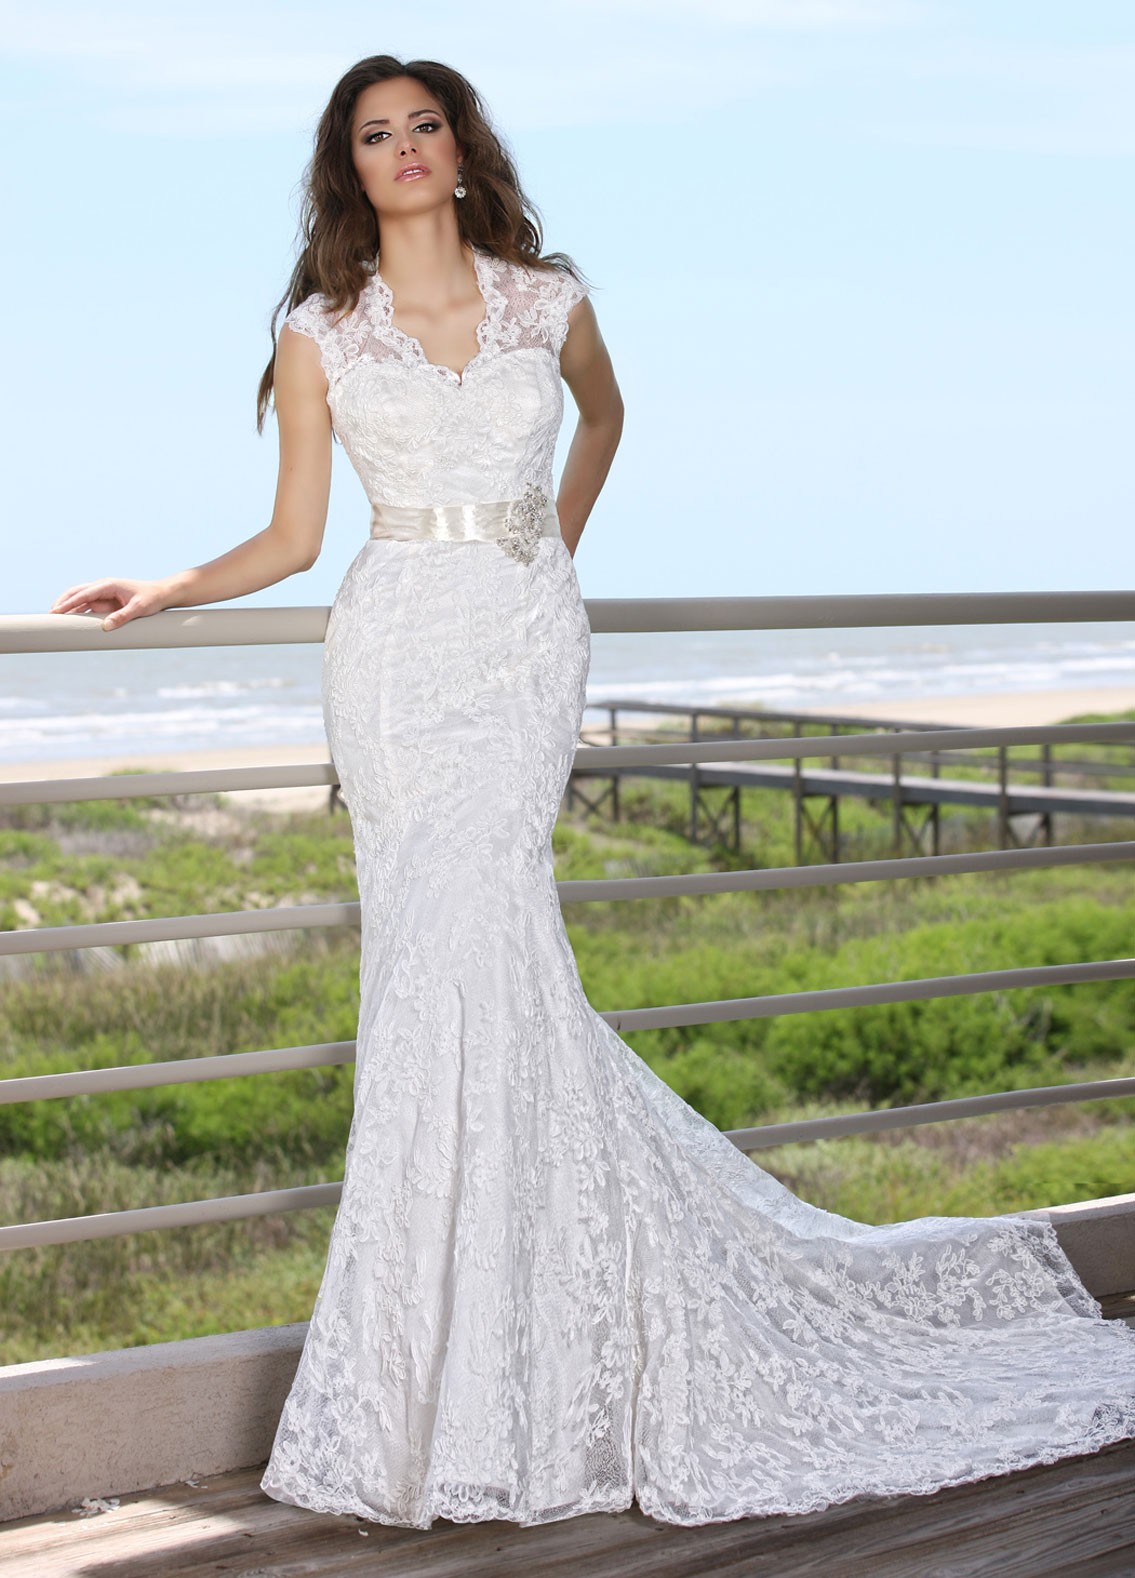 Wedding Dresses Sheath Best 10 - Find the Perfect Venue for Your ...